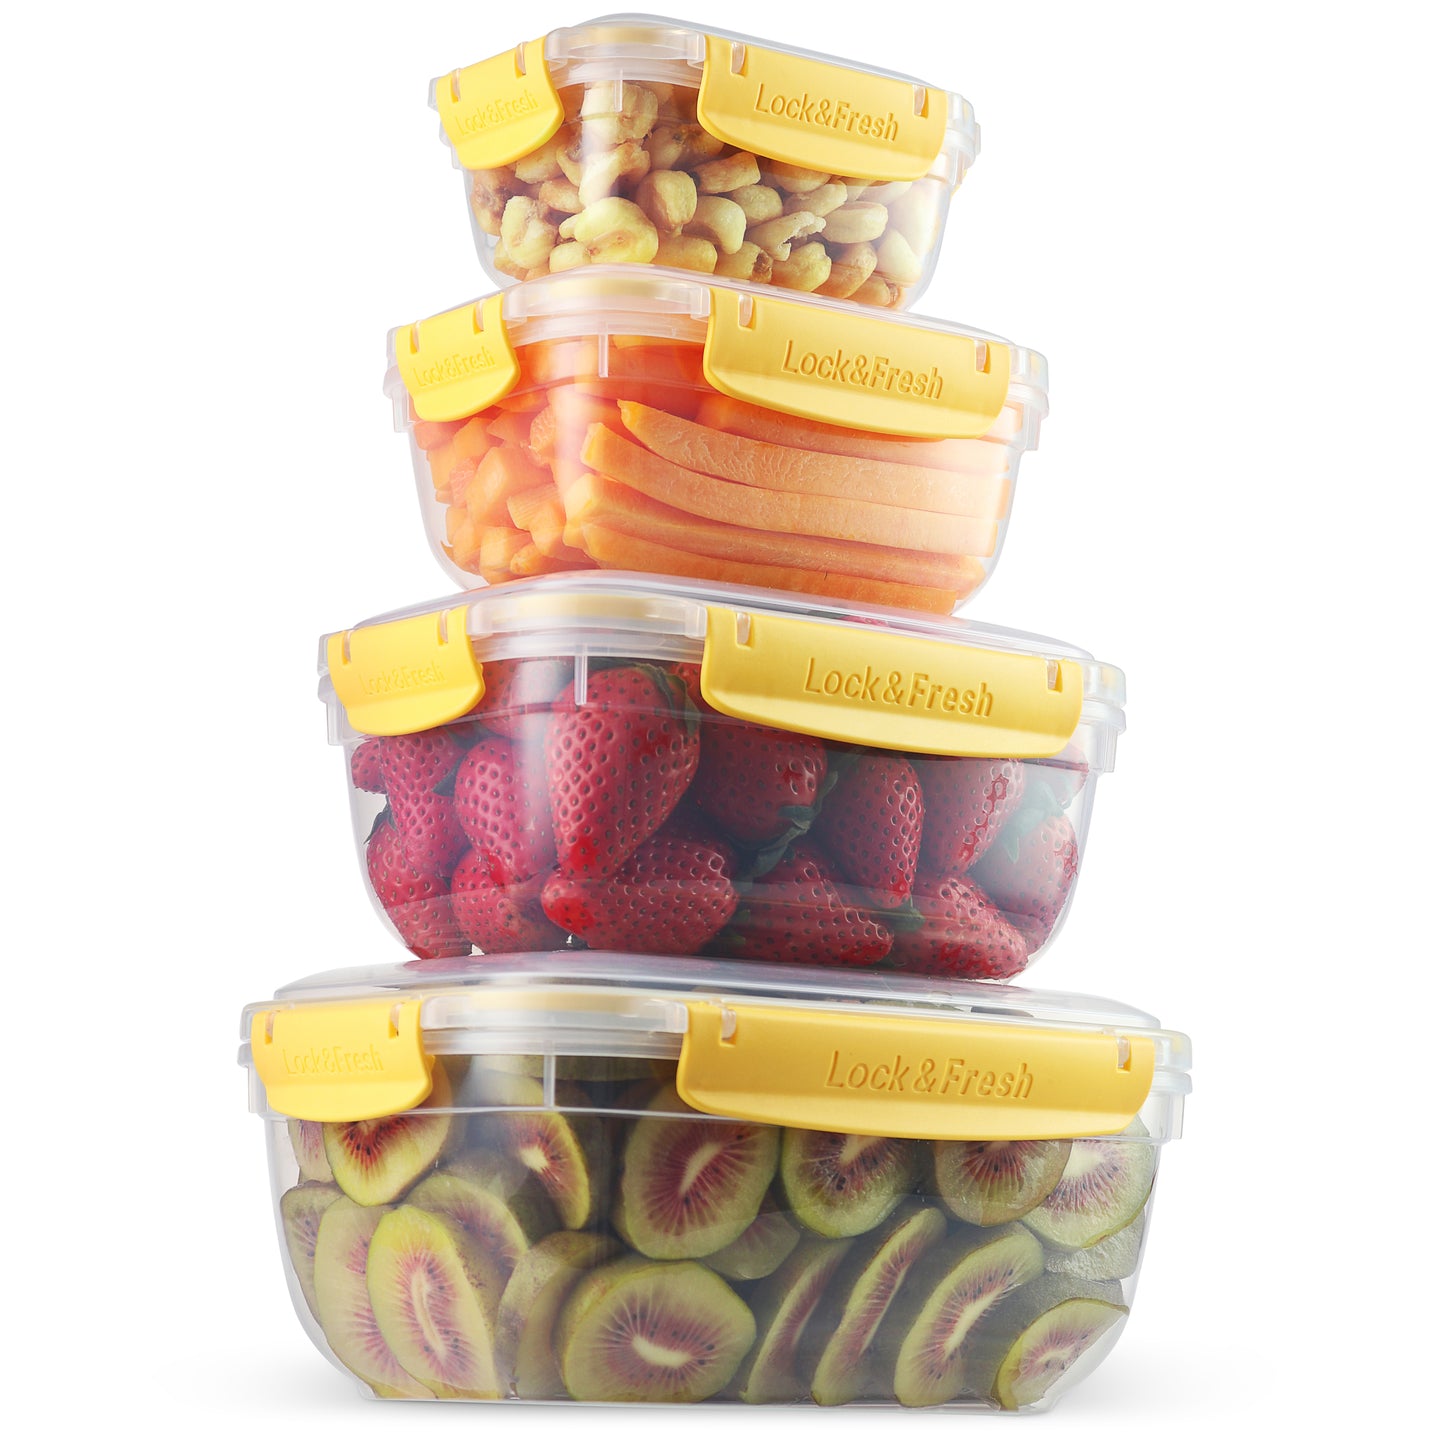 Set of 4 Rectangular Sealed Containers, Yellow